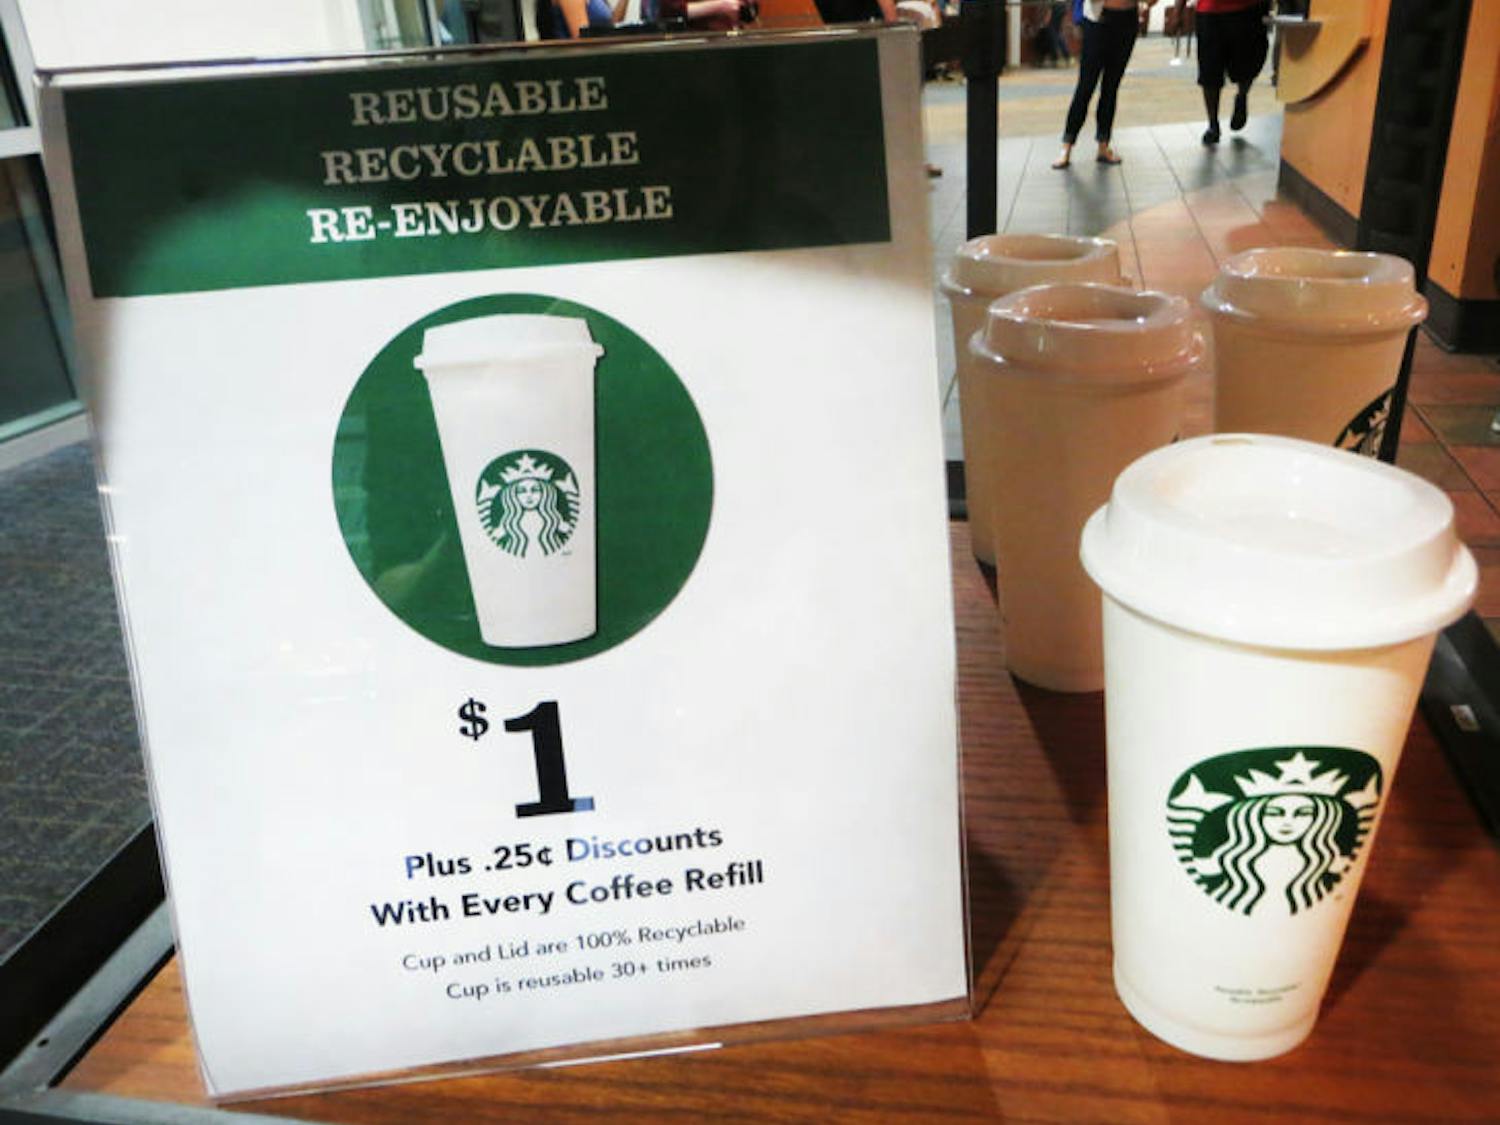 Starbucks is now offering new reusable, plastic cups for $1. Consumers save 25 cents when they bring the reusable cup.